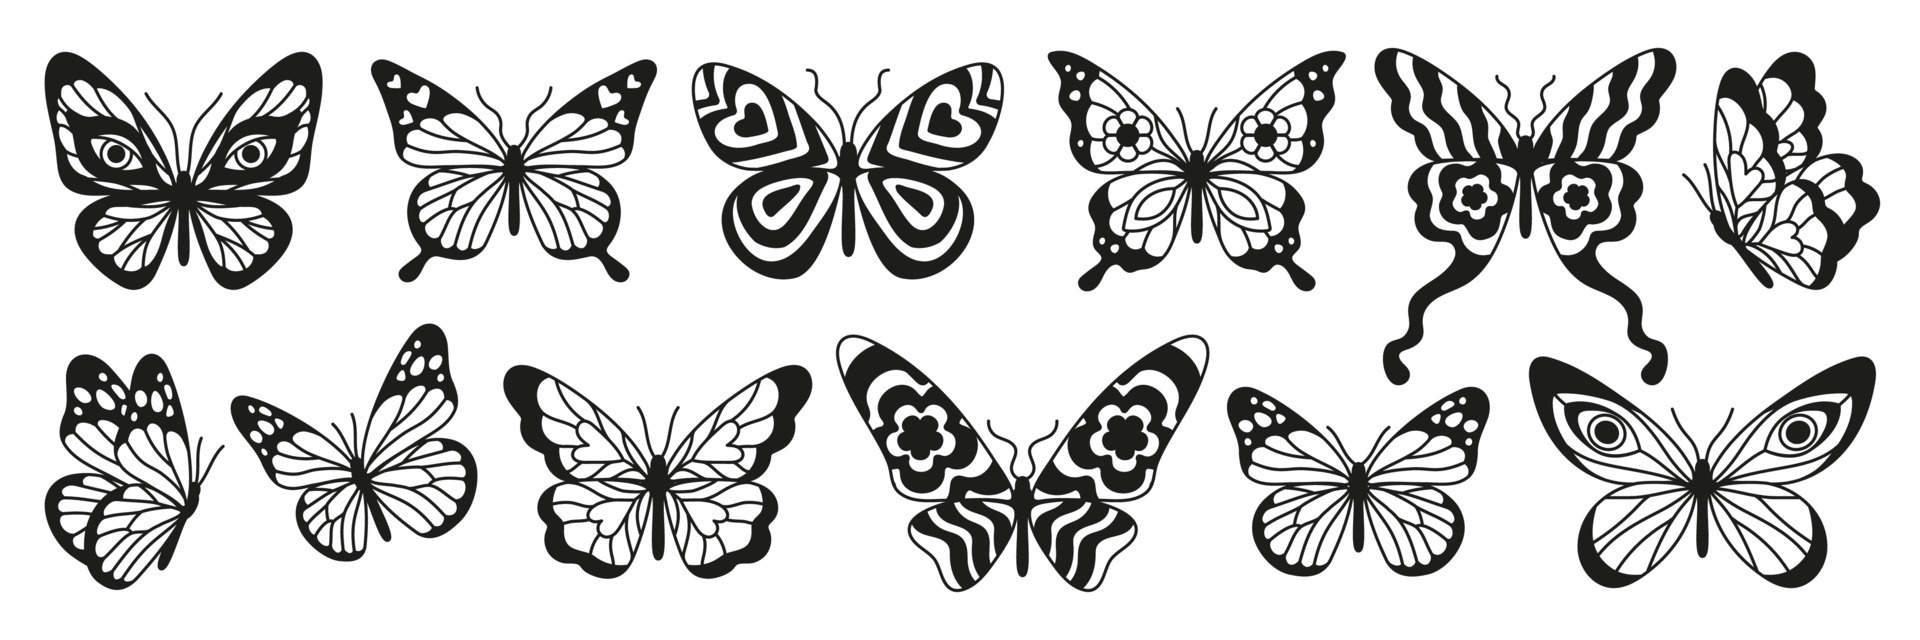 Butterfly tattoo art stickers. Black sketches. Vector hand drawn ...